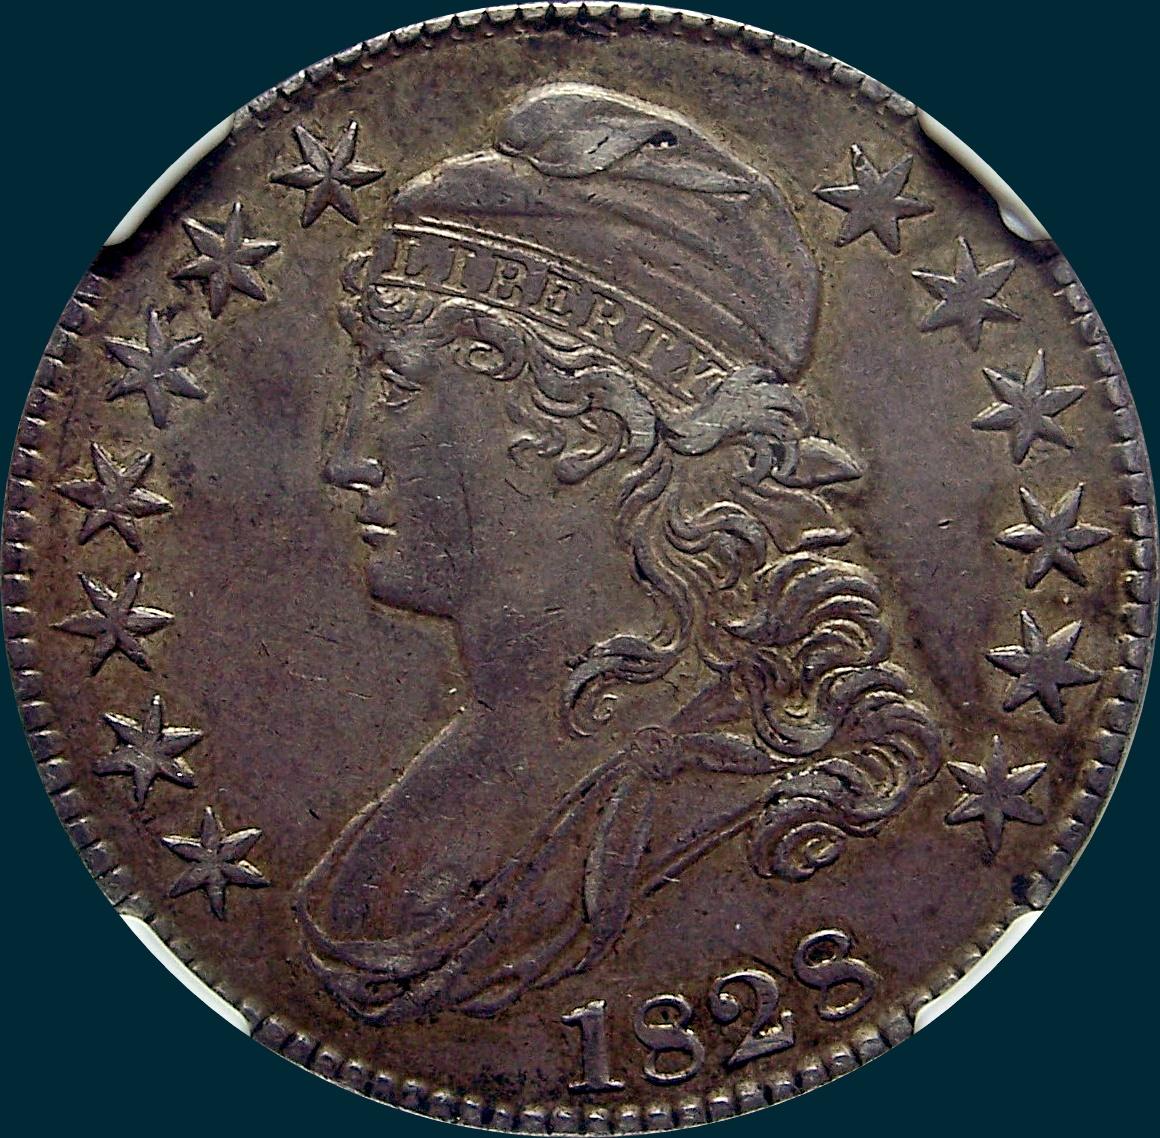 1828 O-110, small 8's large letters, capped bust half dollar